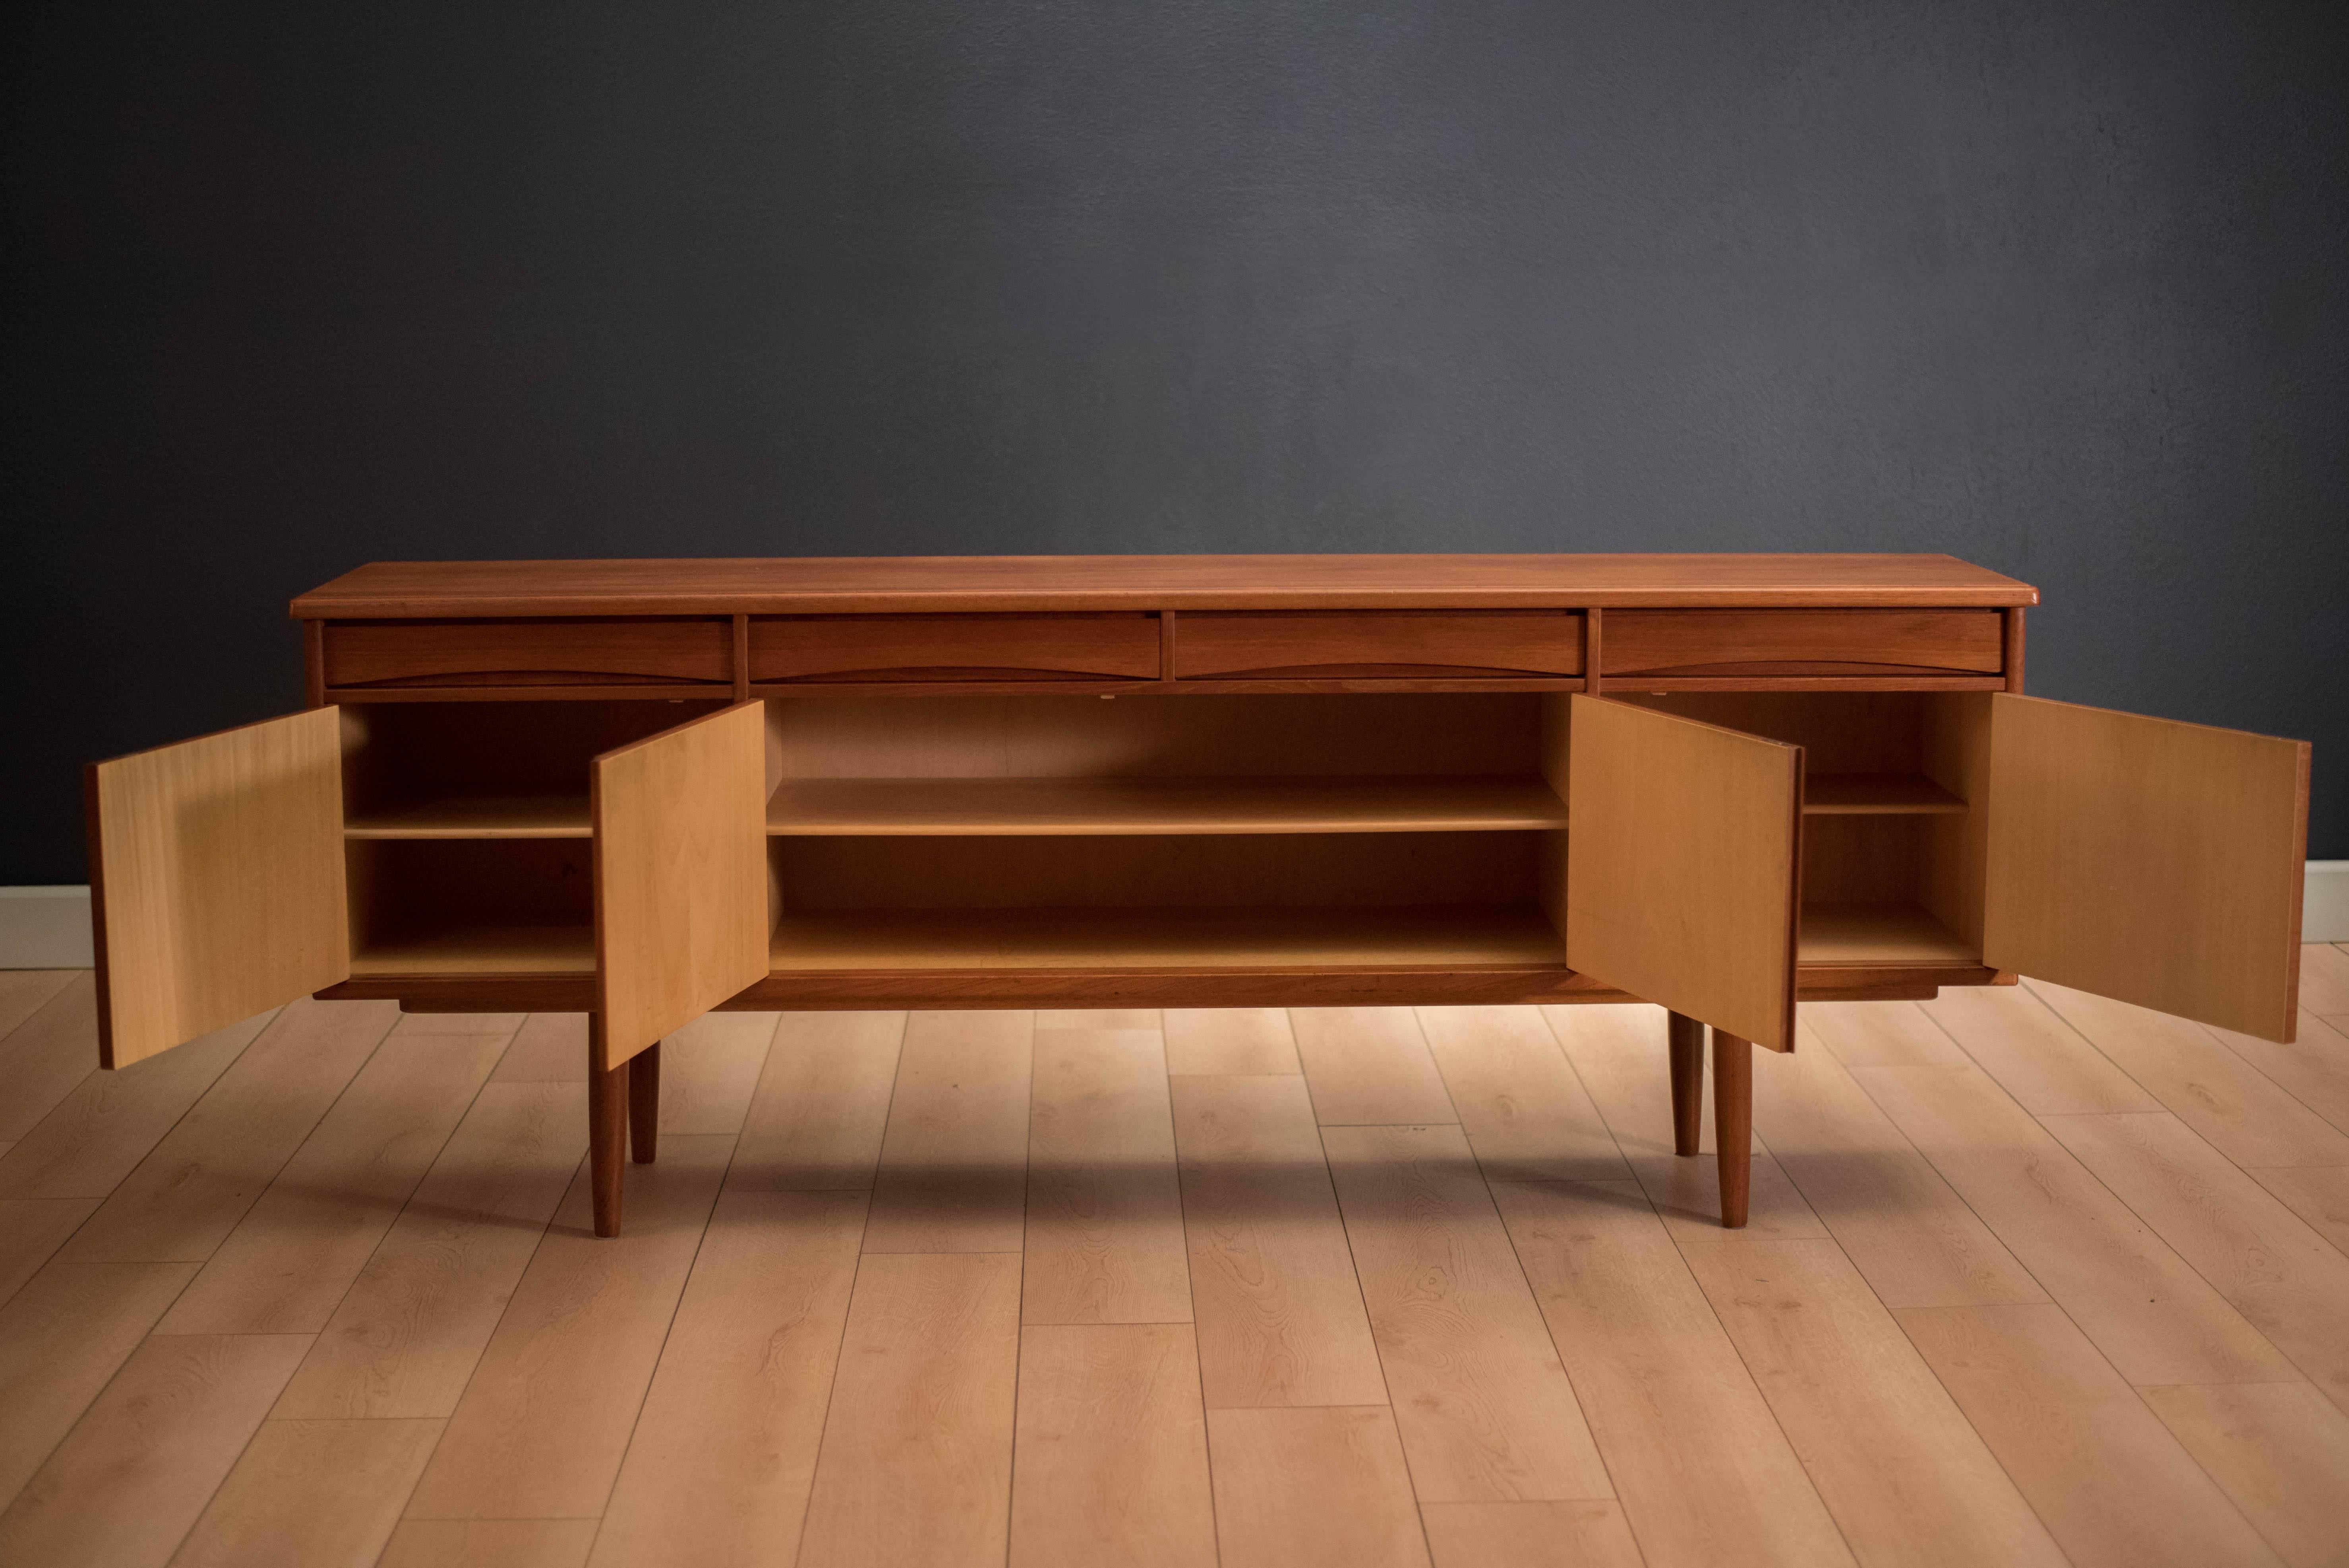 Mid-Century teak sideboard or credenza made in Norway. This piece features four drawers with unique sculpted handles and three interior cabinets with shelving. Skeleton key is included.

